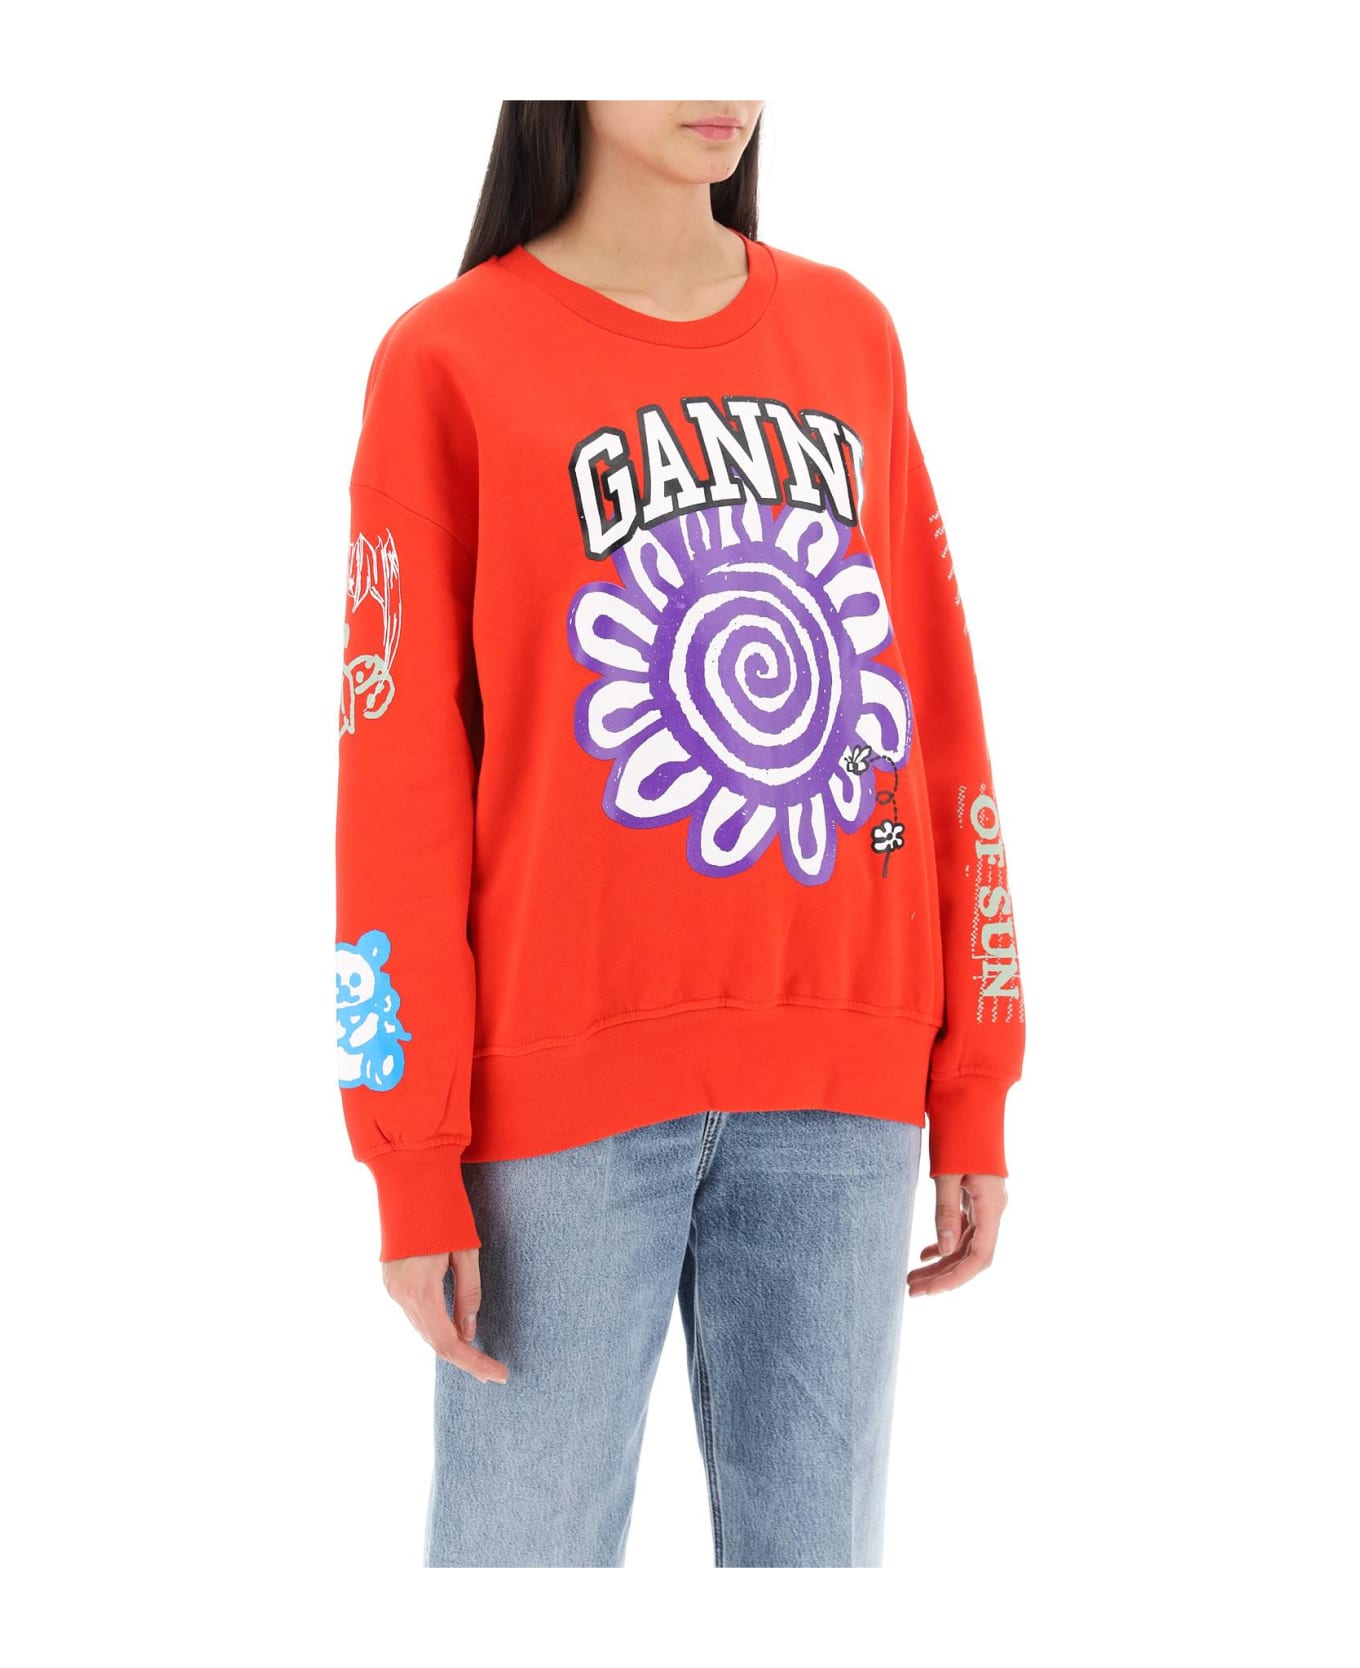 Ganni Sweatshirt With Graphic Prints - HIGH RISK RED (Red)